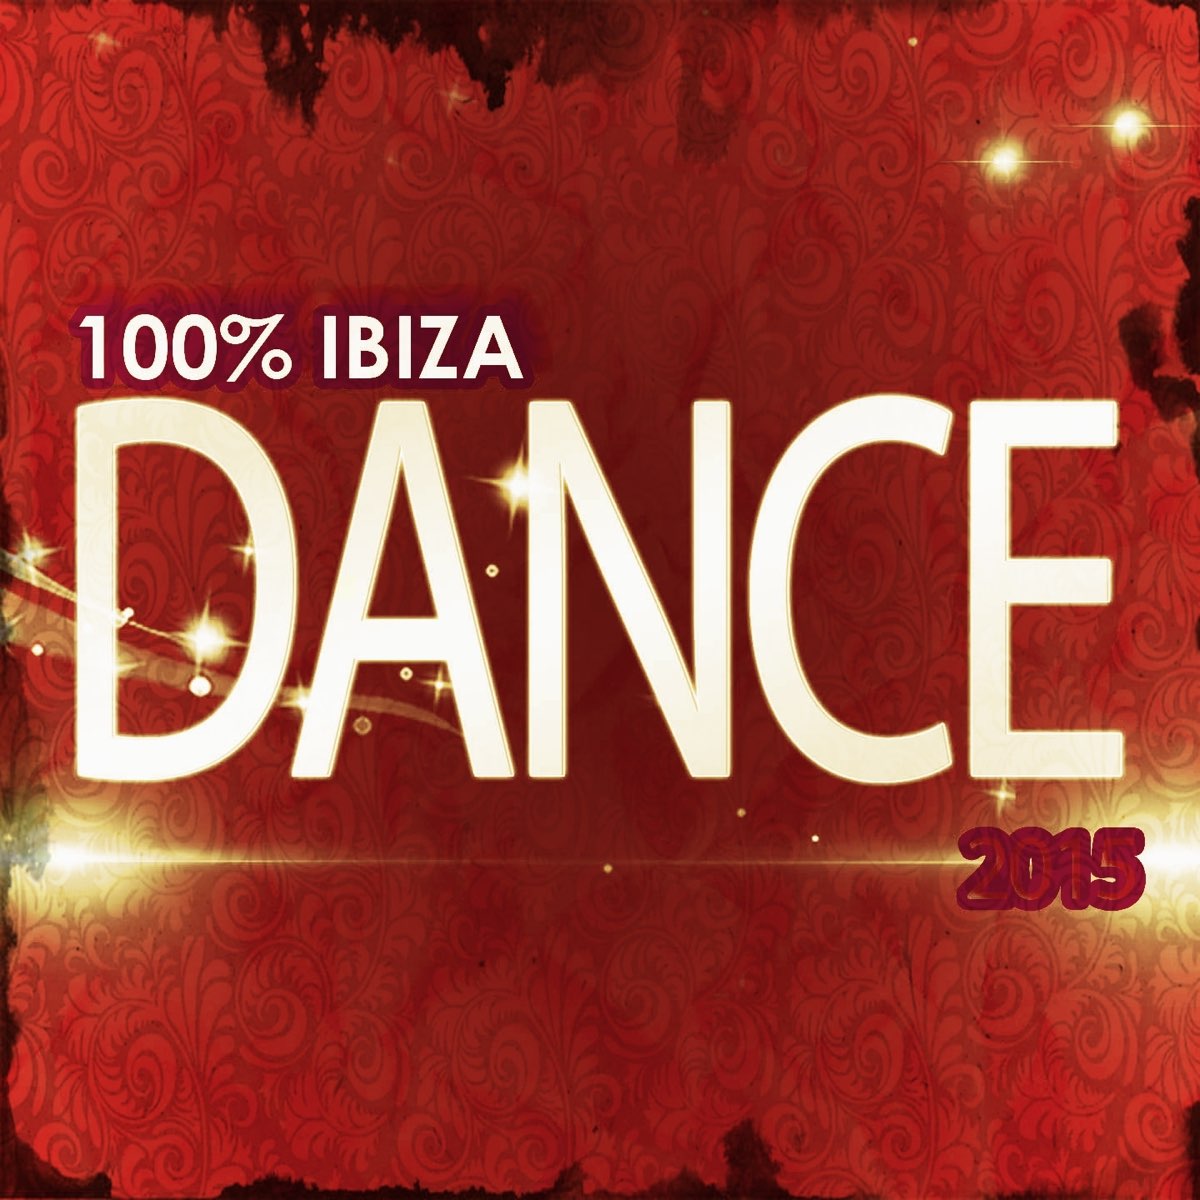 100% Ibiza Dance 2015 (100 Dance Best House Progressive Trance Melbourne Electro EDM Vocal Extended Hits for DJ Set) by Various Artists on Apple Music